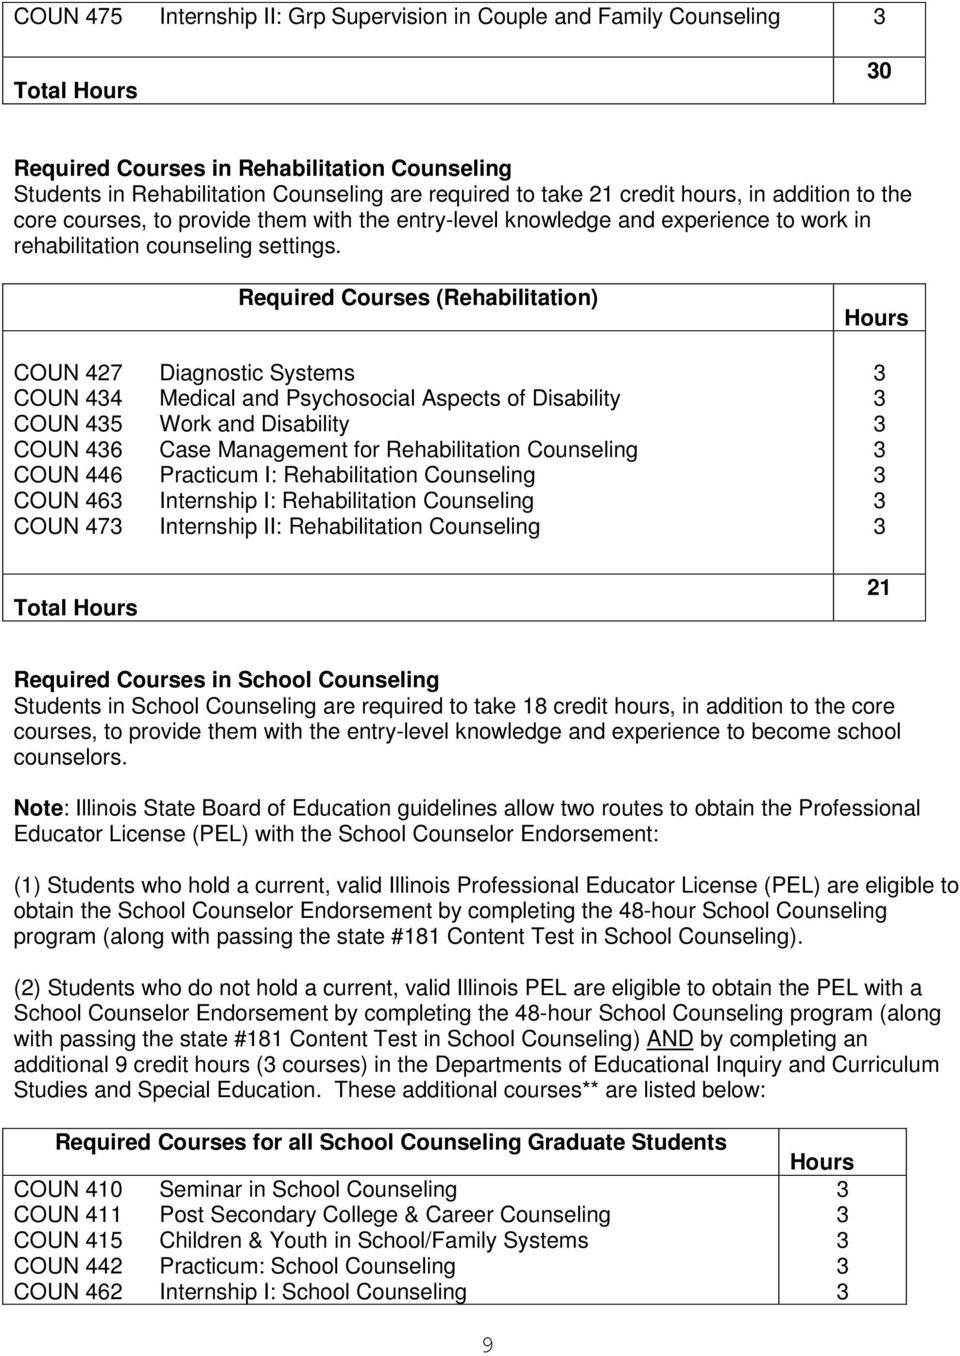 COUN 427 COUN 44 COUN 45 COUN 46 COUN 446 COUN 46 COUN 47 Required Courses (Rehabilitation) Diagnostic Systems Medical and Psychosocial Aspects of Disability Work and Disability Case Management for